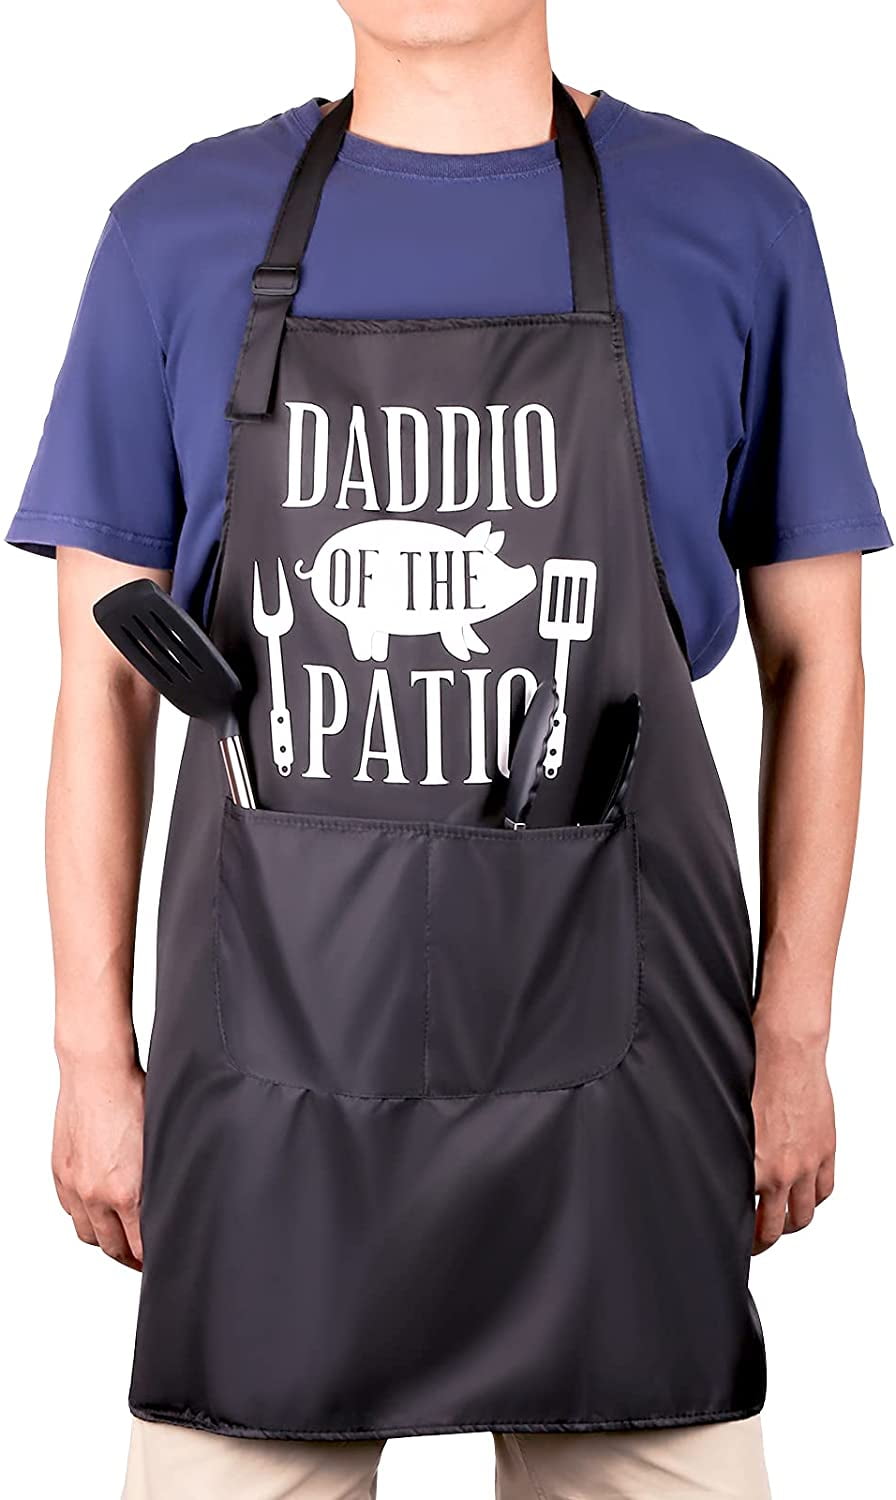 Funny Cooking Grilling BBQ Aprons for Men Adjustable Chef Kitchen Apron with 2 